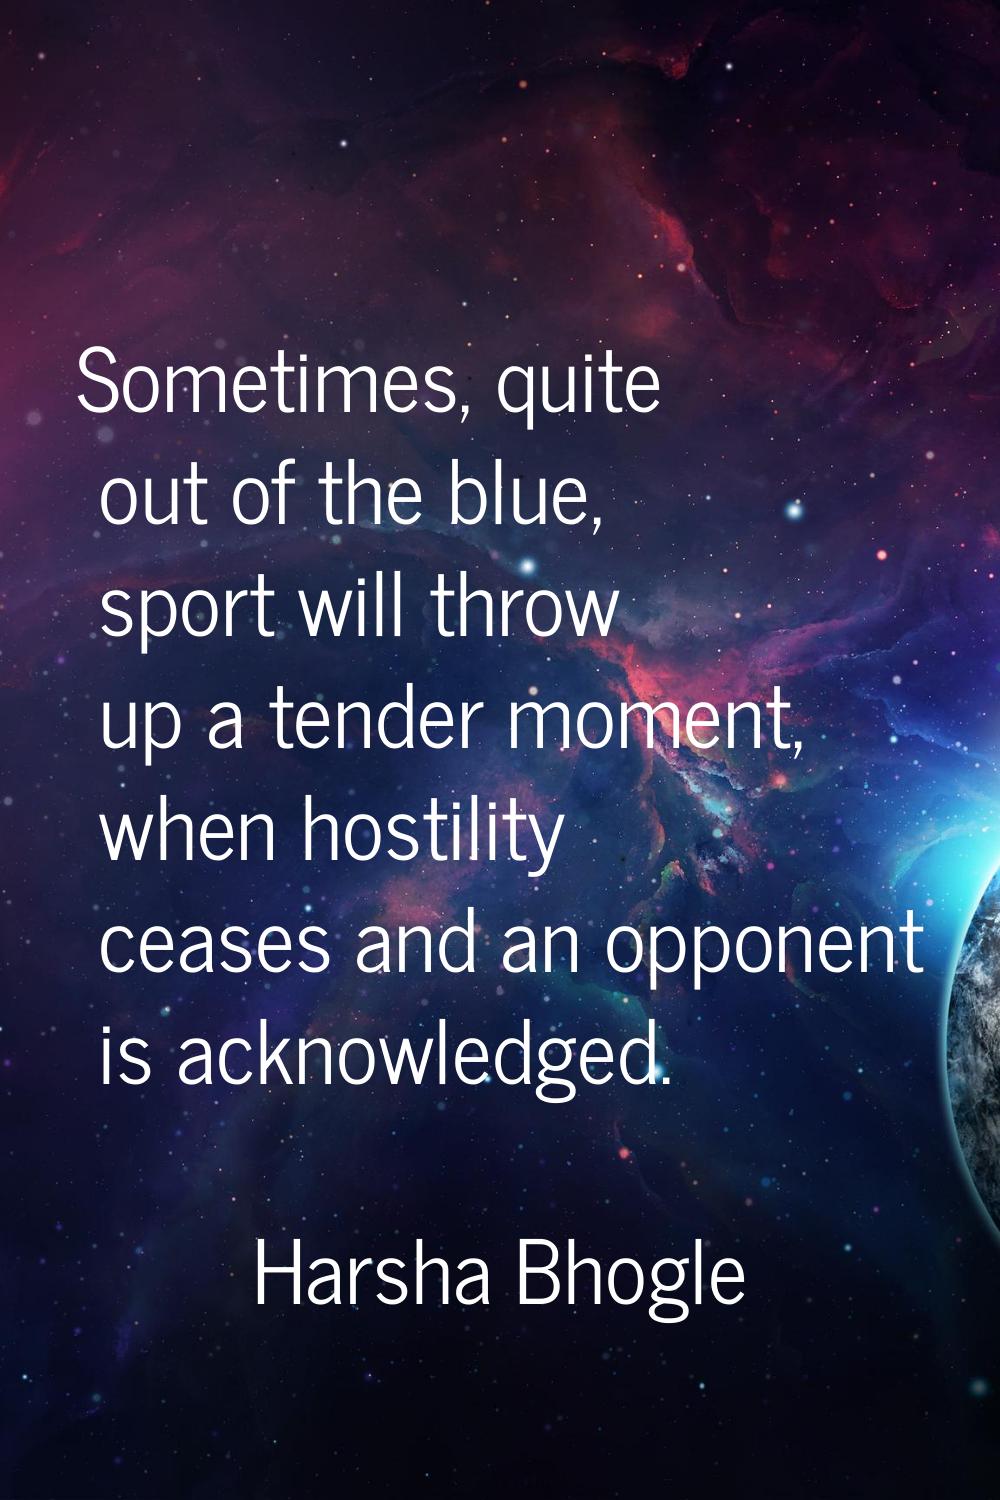 Sometimes, quite out of the blue, sport will throw up a tender moment, when hostility ceases and an